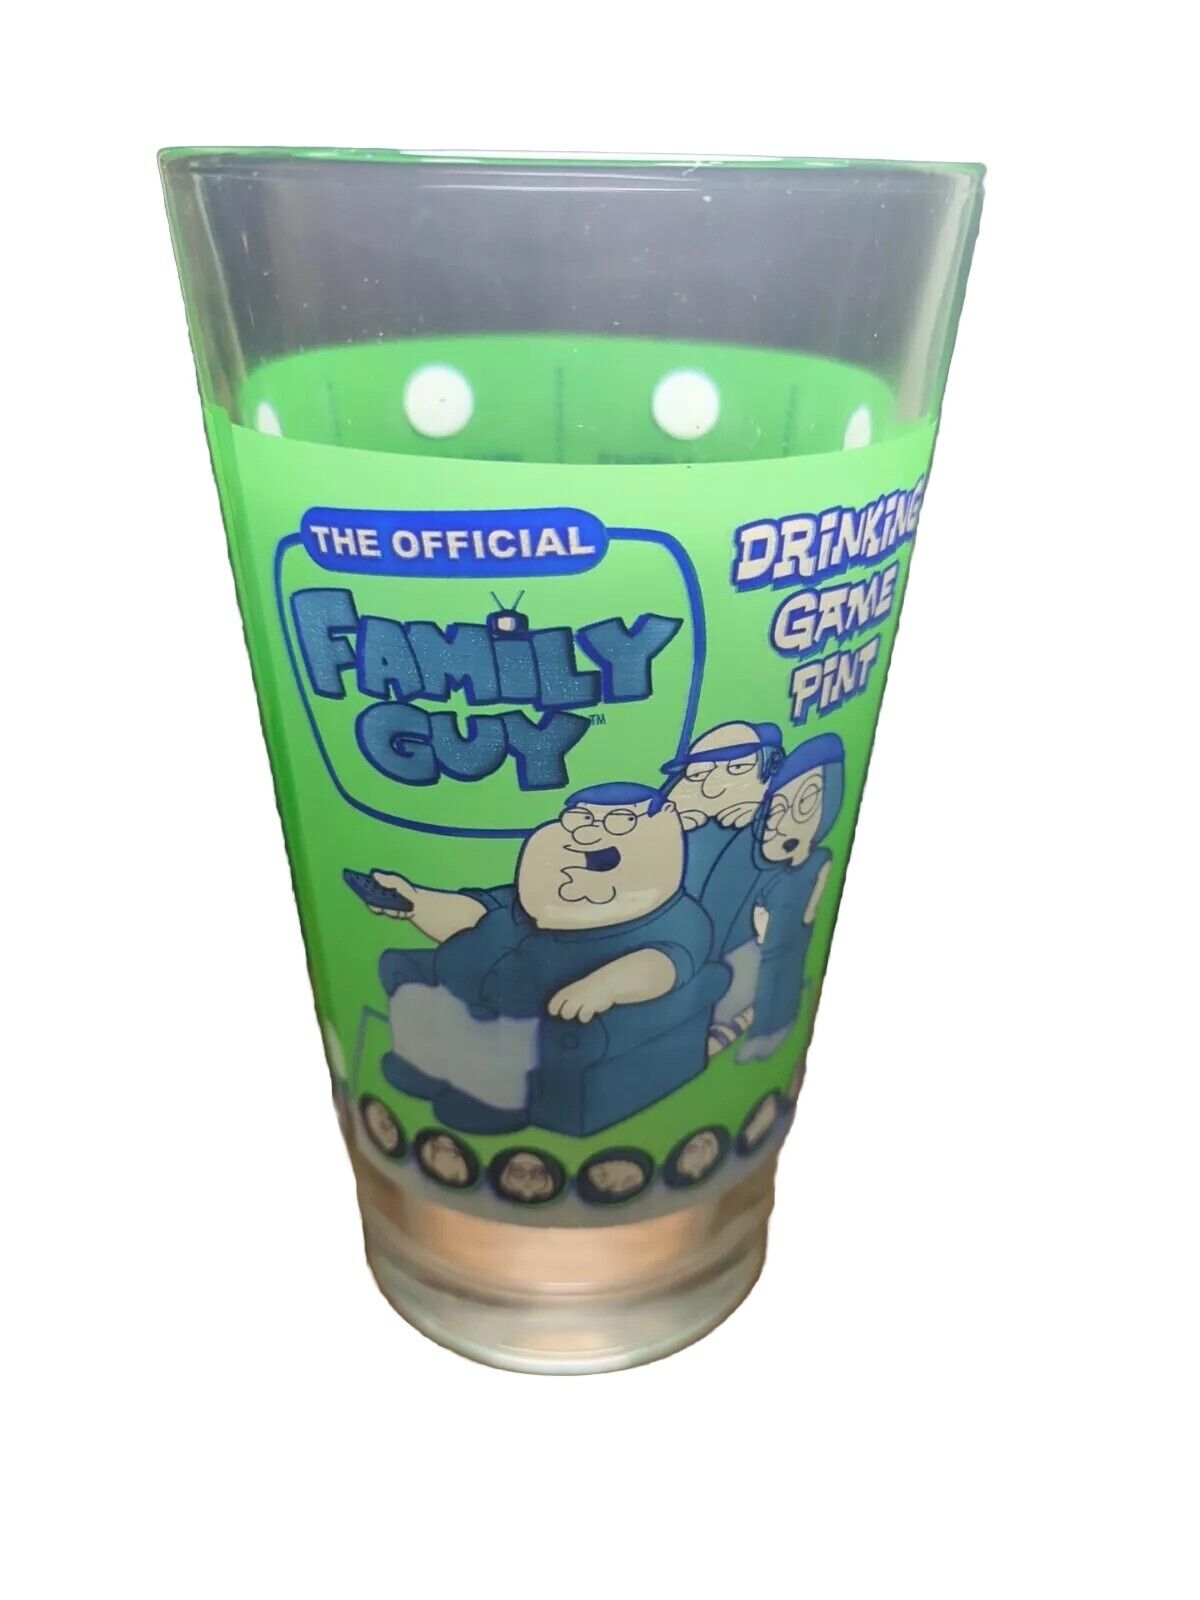 Official FAMILY GUY (2004) Drinking Game Tumbler Glass Pint